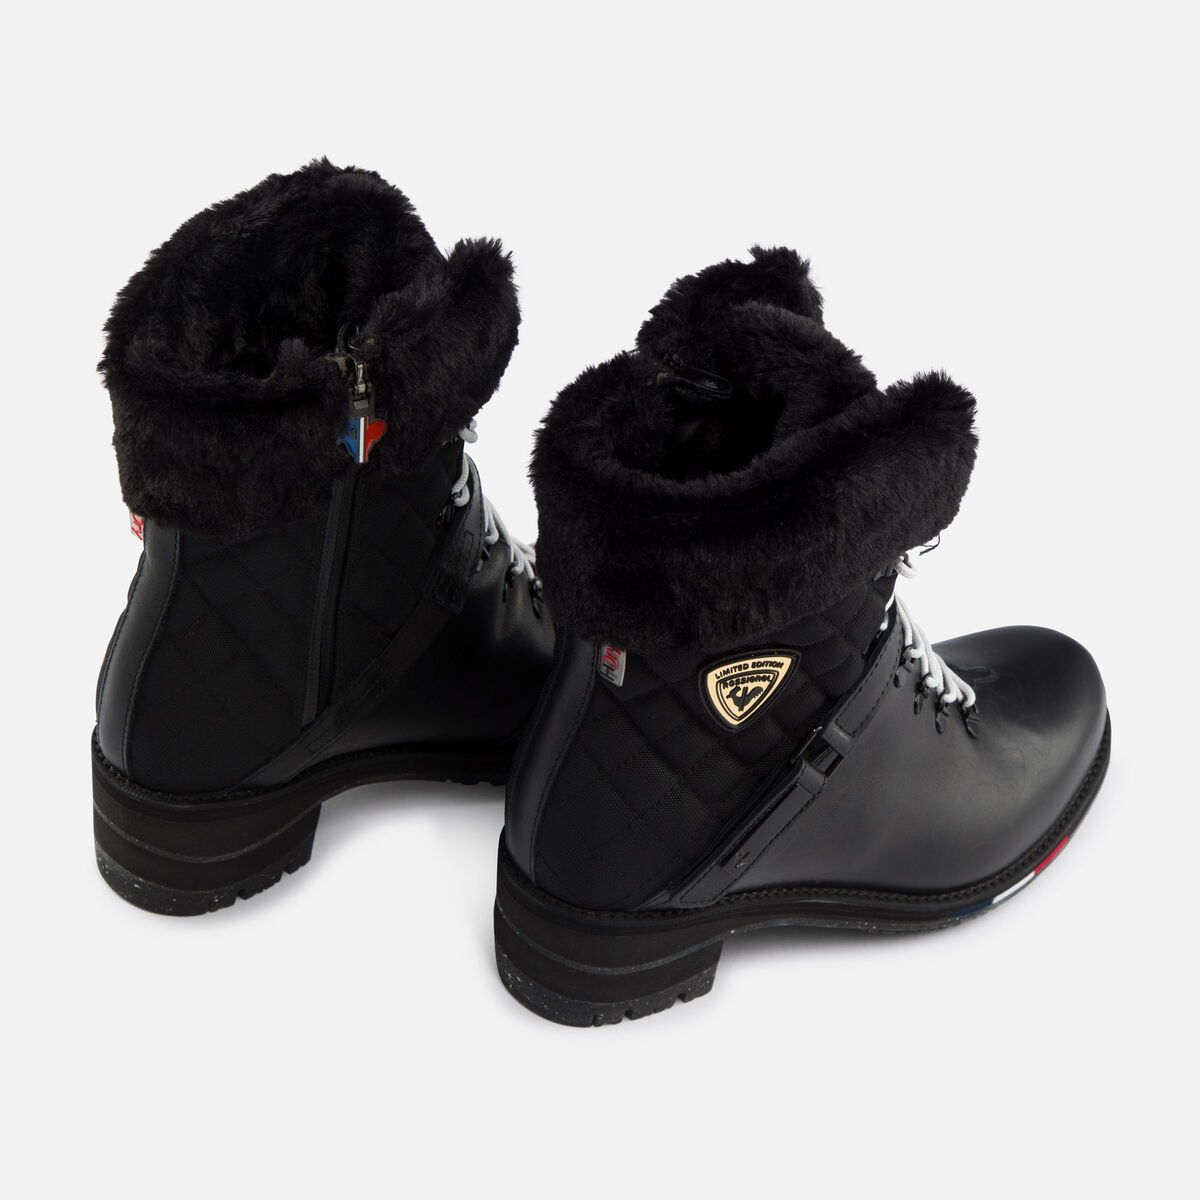 1907 Megeve Limited Editions Damenstiefel